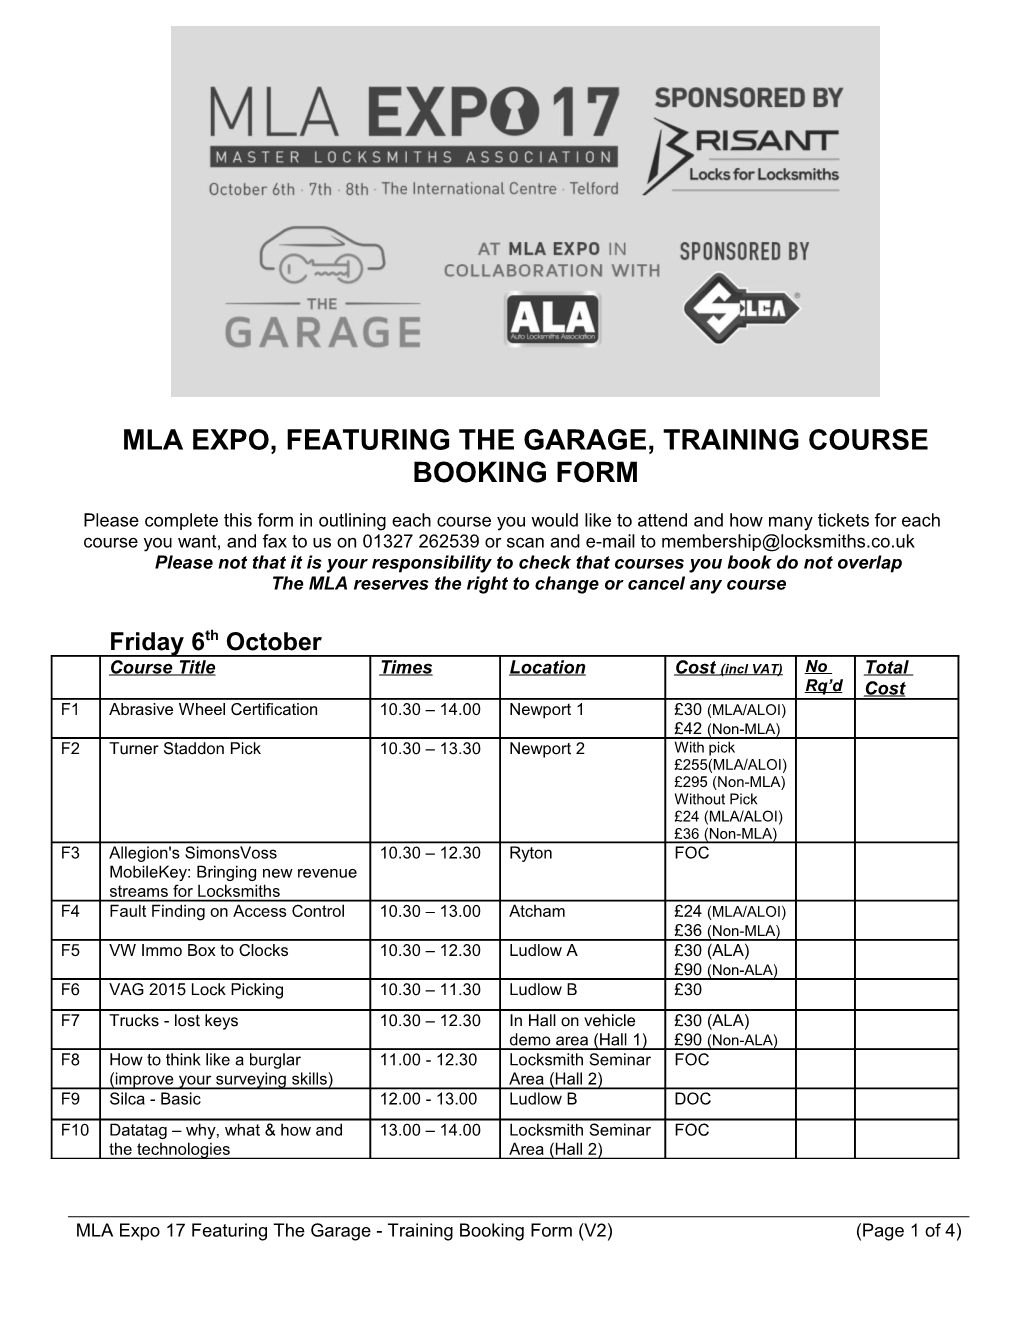 Mla Expo, Featuring the Garage, Training Course Booking Form